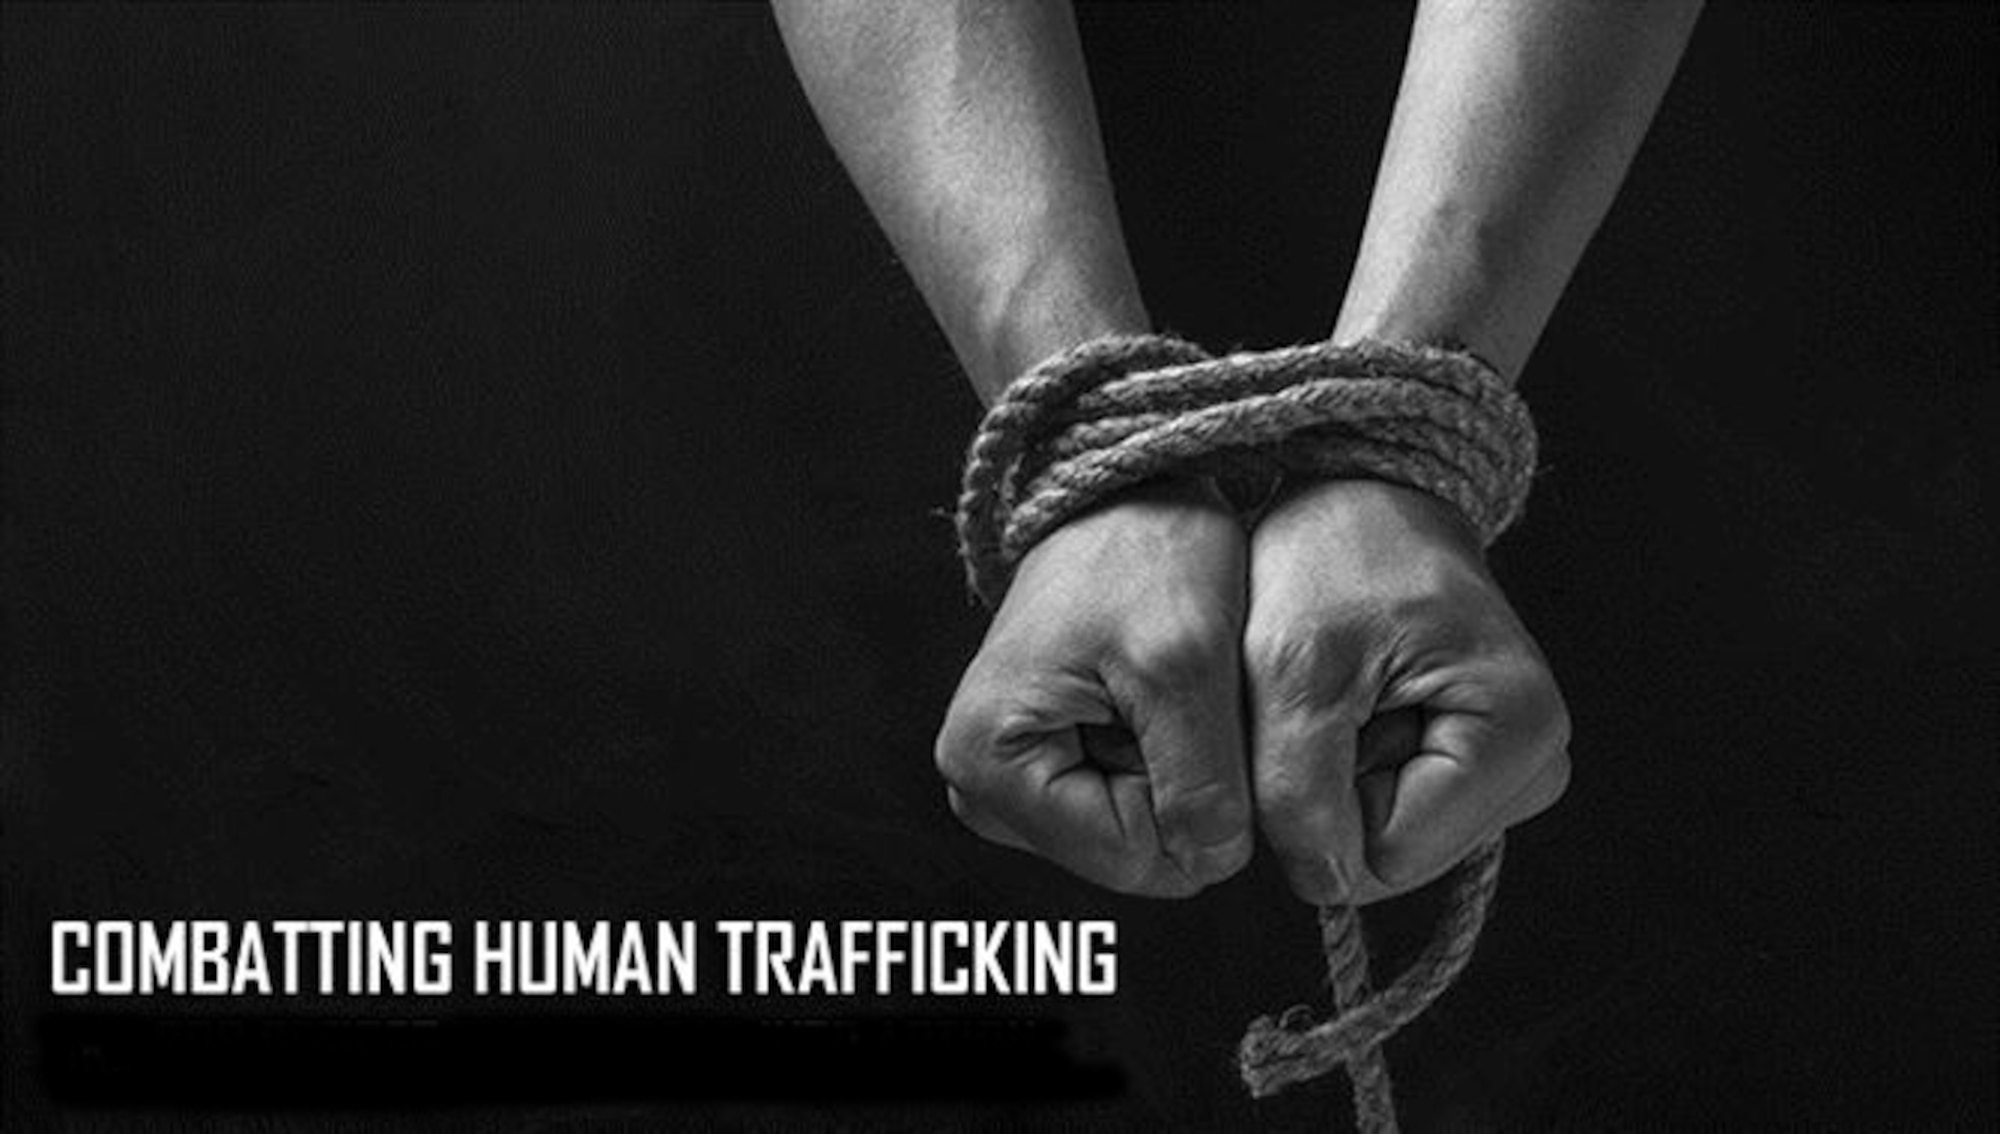 Human trafficking is a crime involving the exploitation of someone for the purposes of involuntary labor or a commercial sex act through the use of force, fraud or coercion. The Department of Defense began the Combating Trafficking In Persons Program in 2014 in order to mitigate the effects of human trafficking not just in the U.S., but also abroad. (U.S. Air Force graphic) 